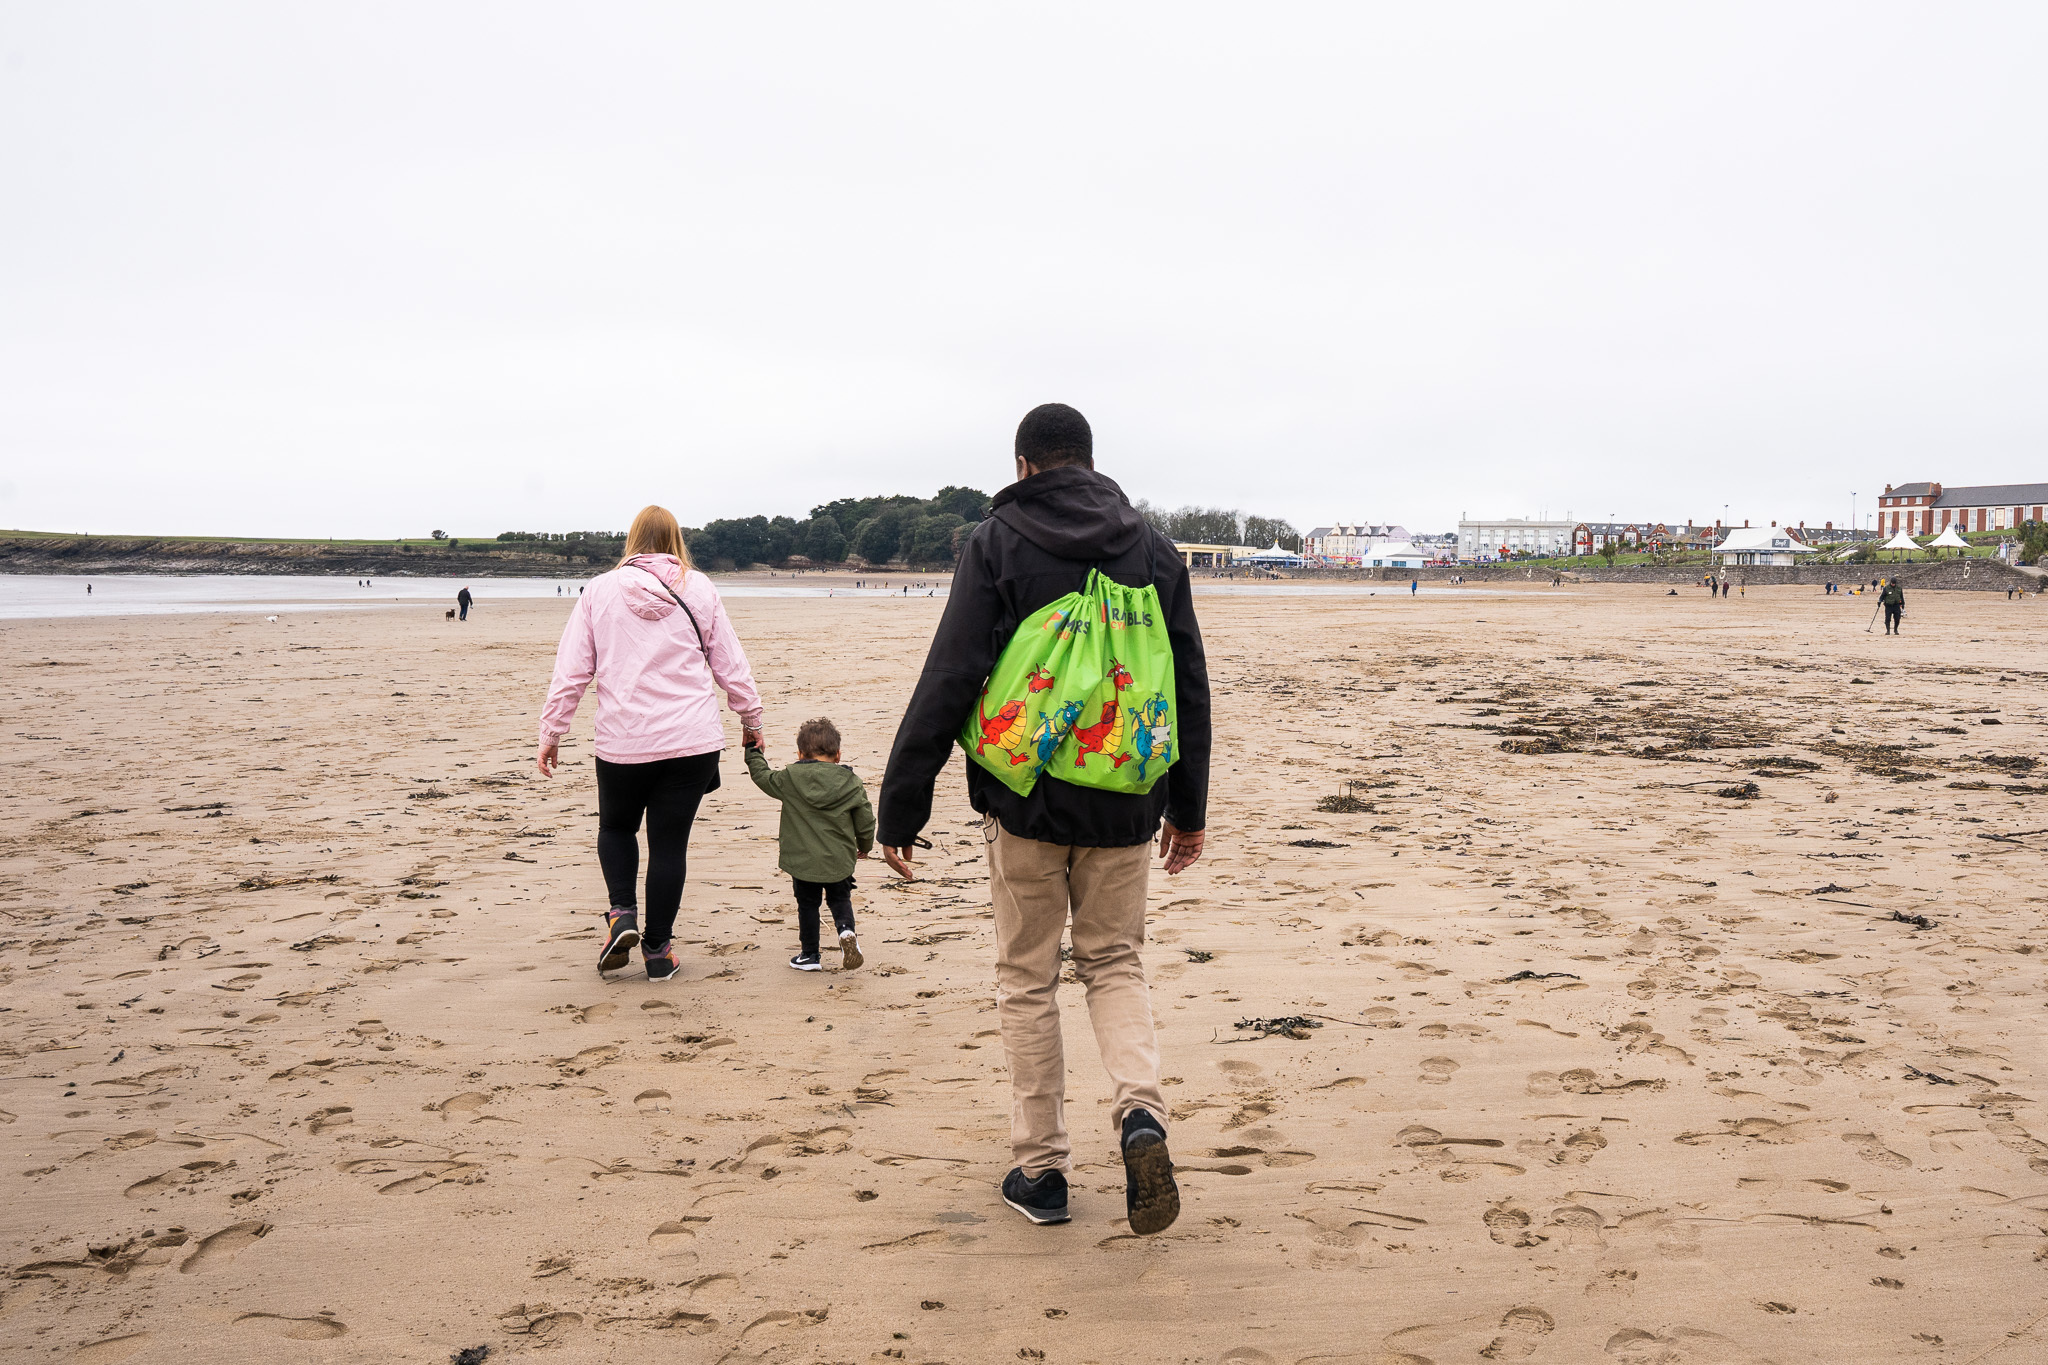 Wales-wide family-friendly walks launched with Transport for Wales and Ramblers Cymru.